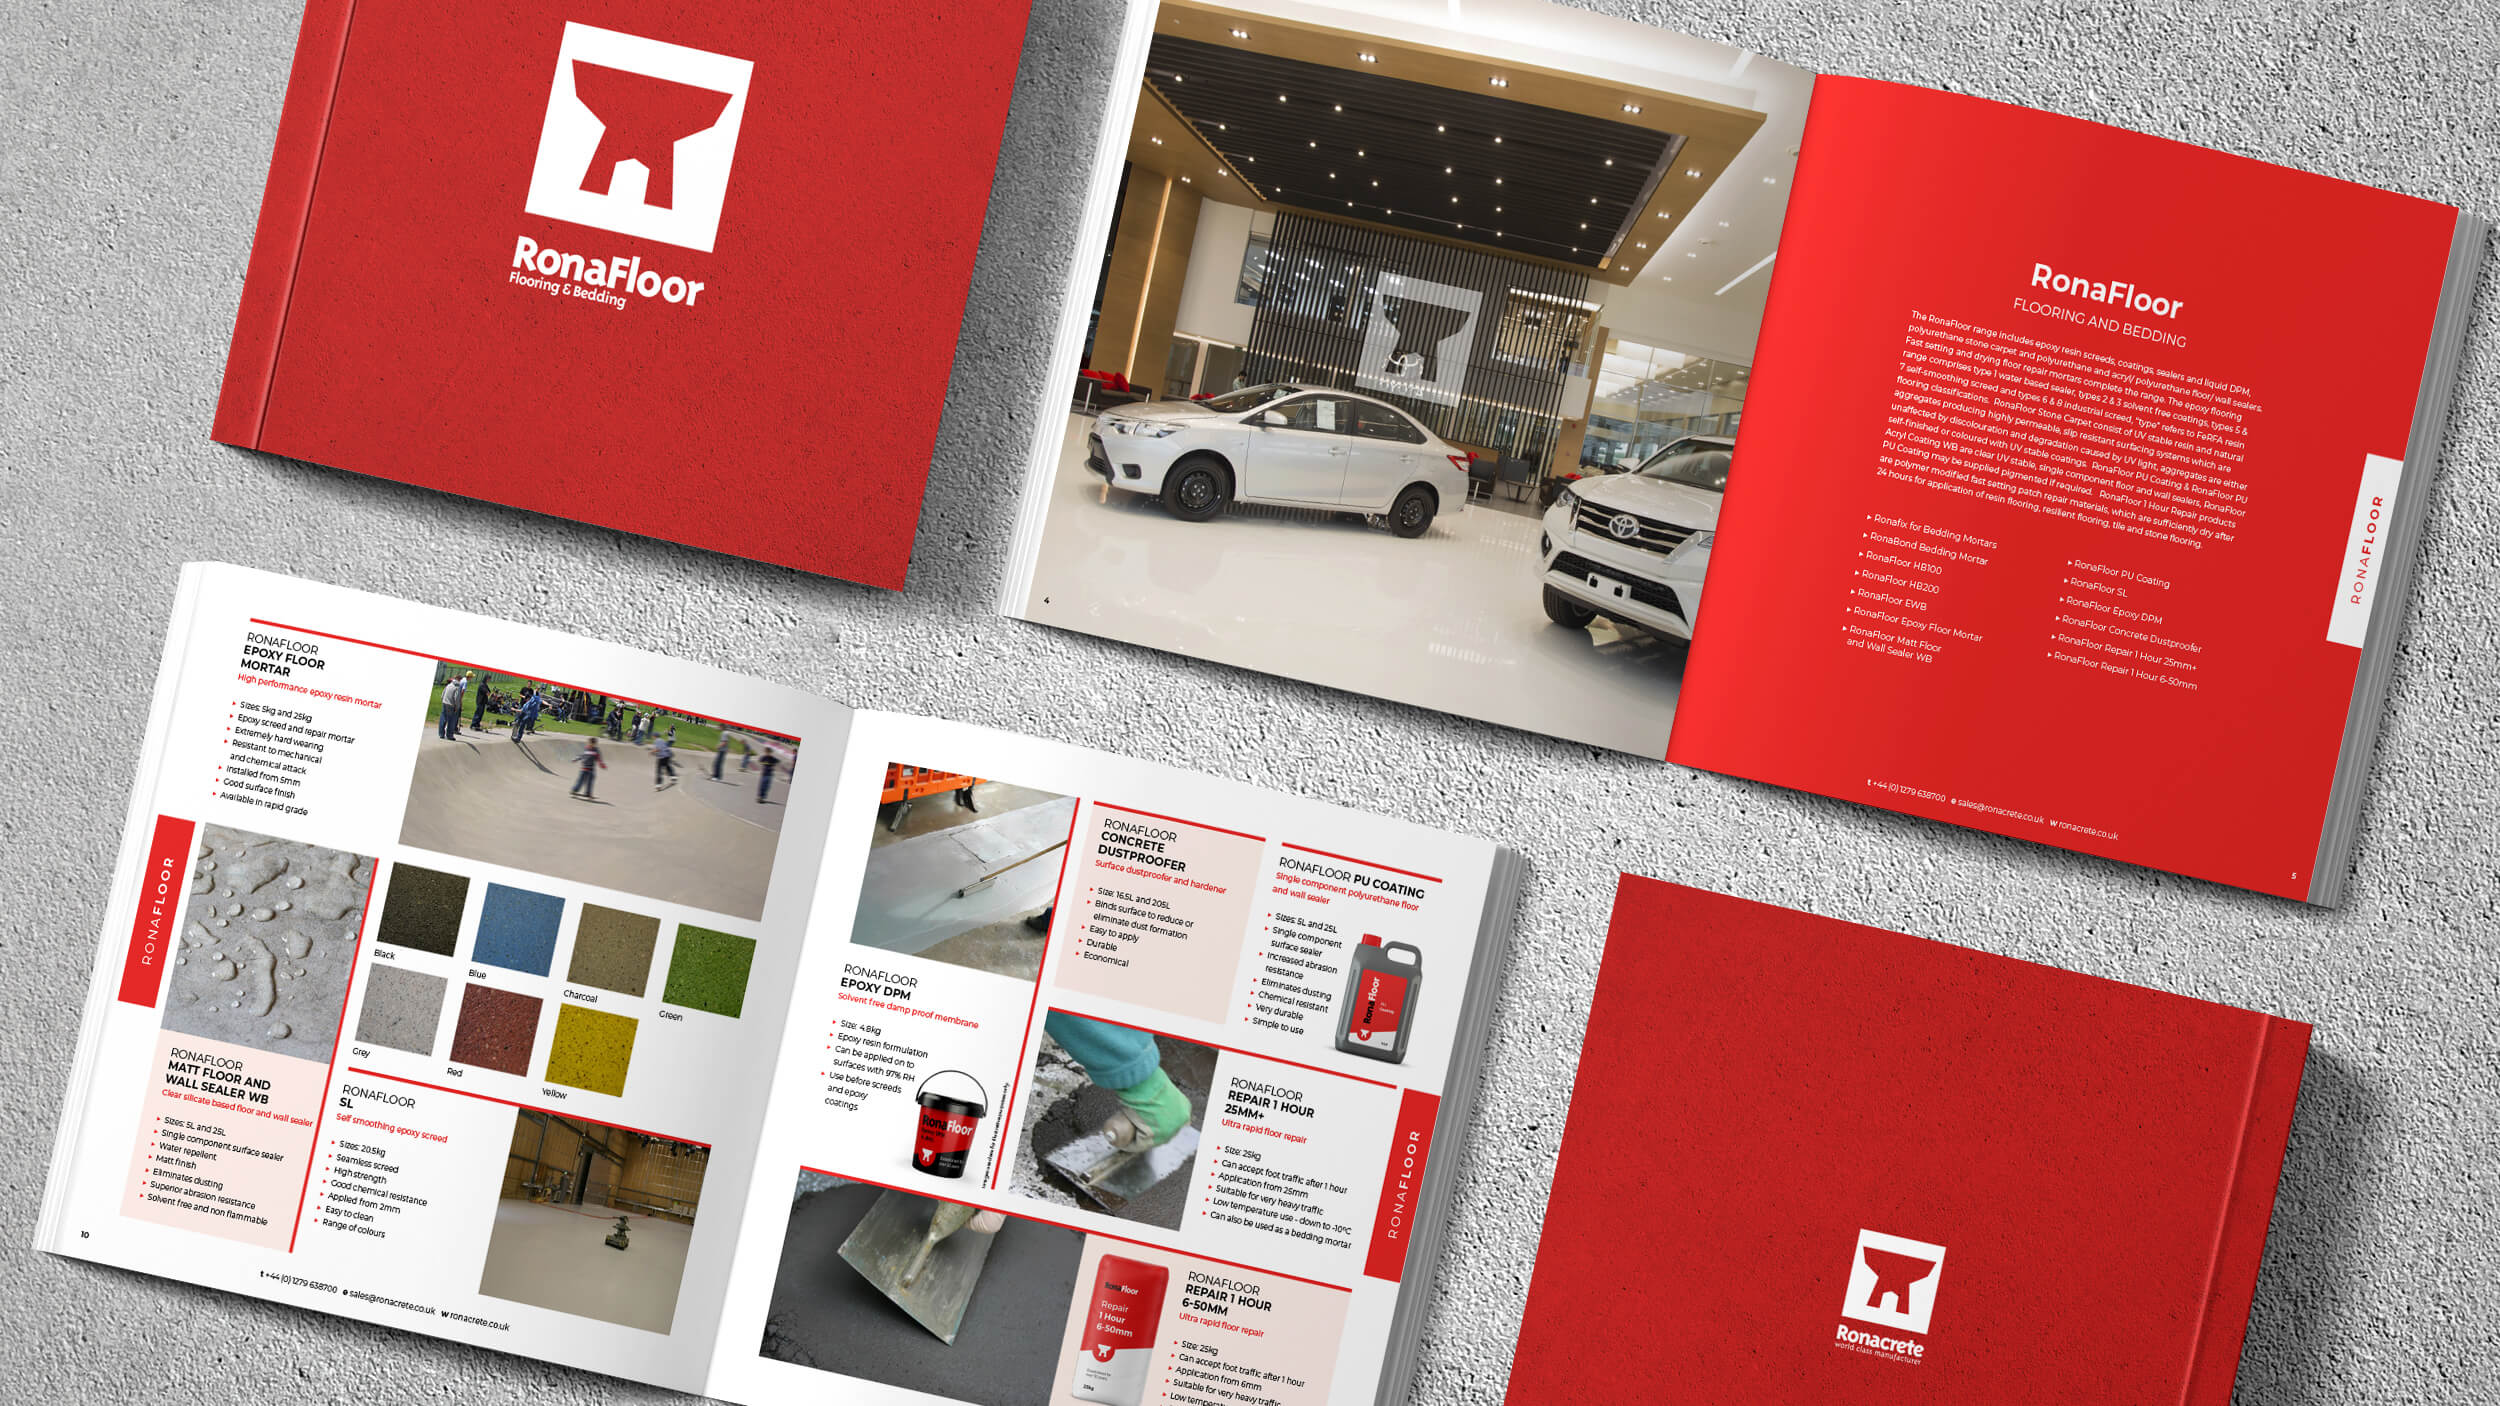 Ronafloor brochure pages and covers showing a range of products available